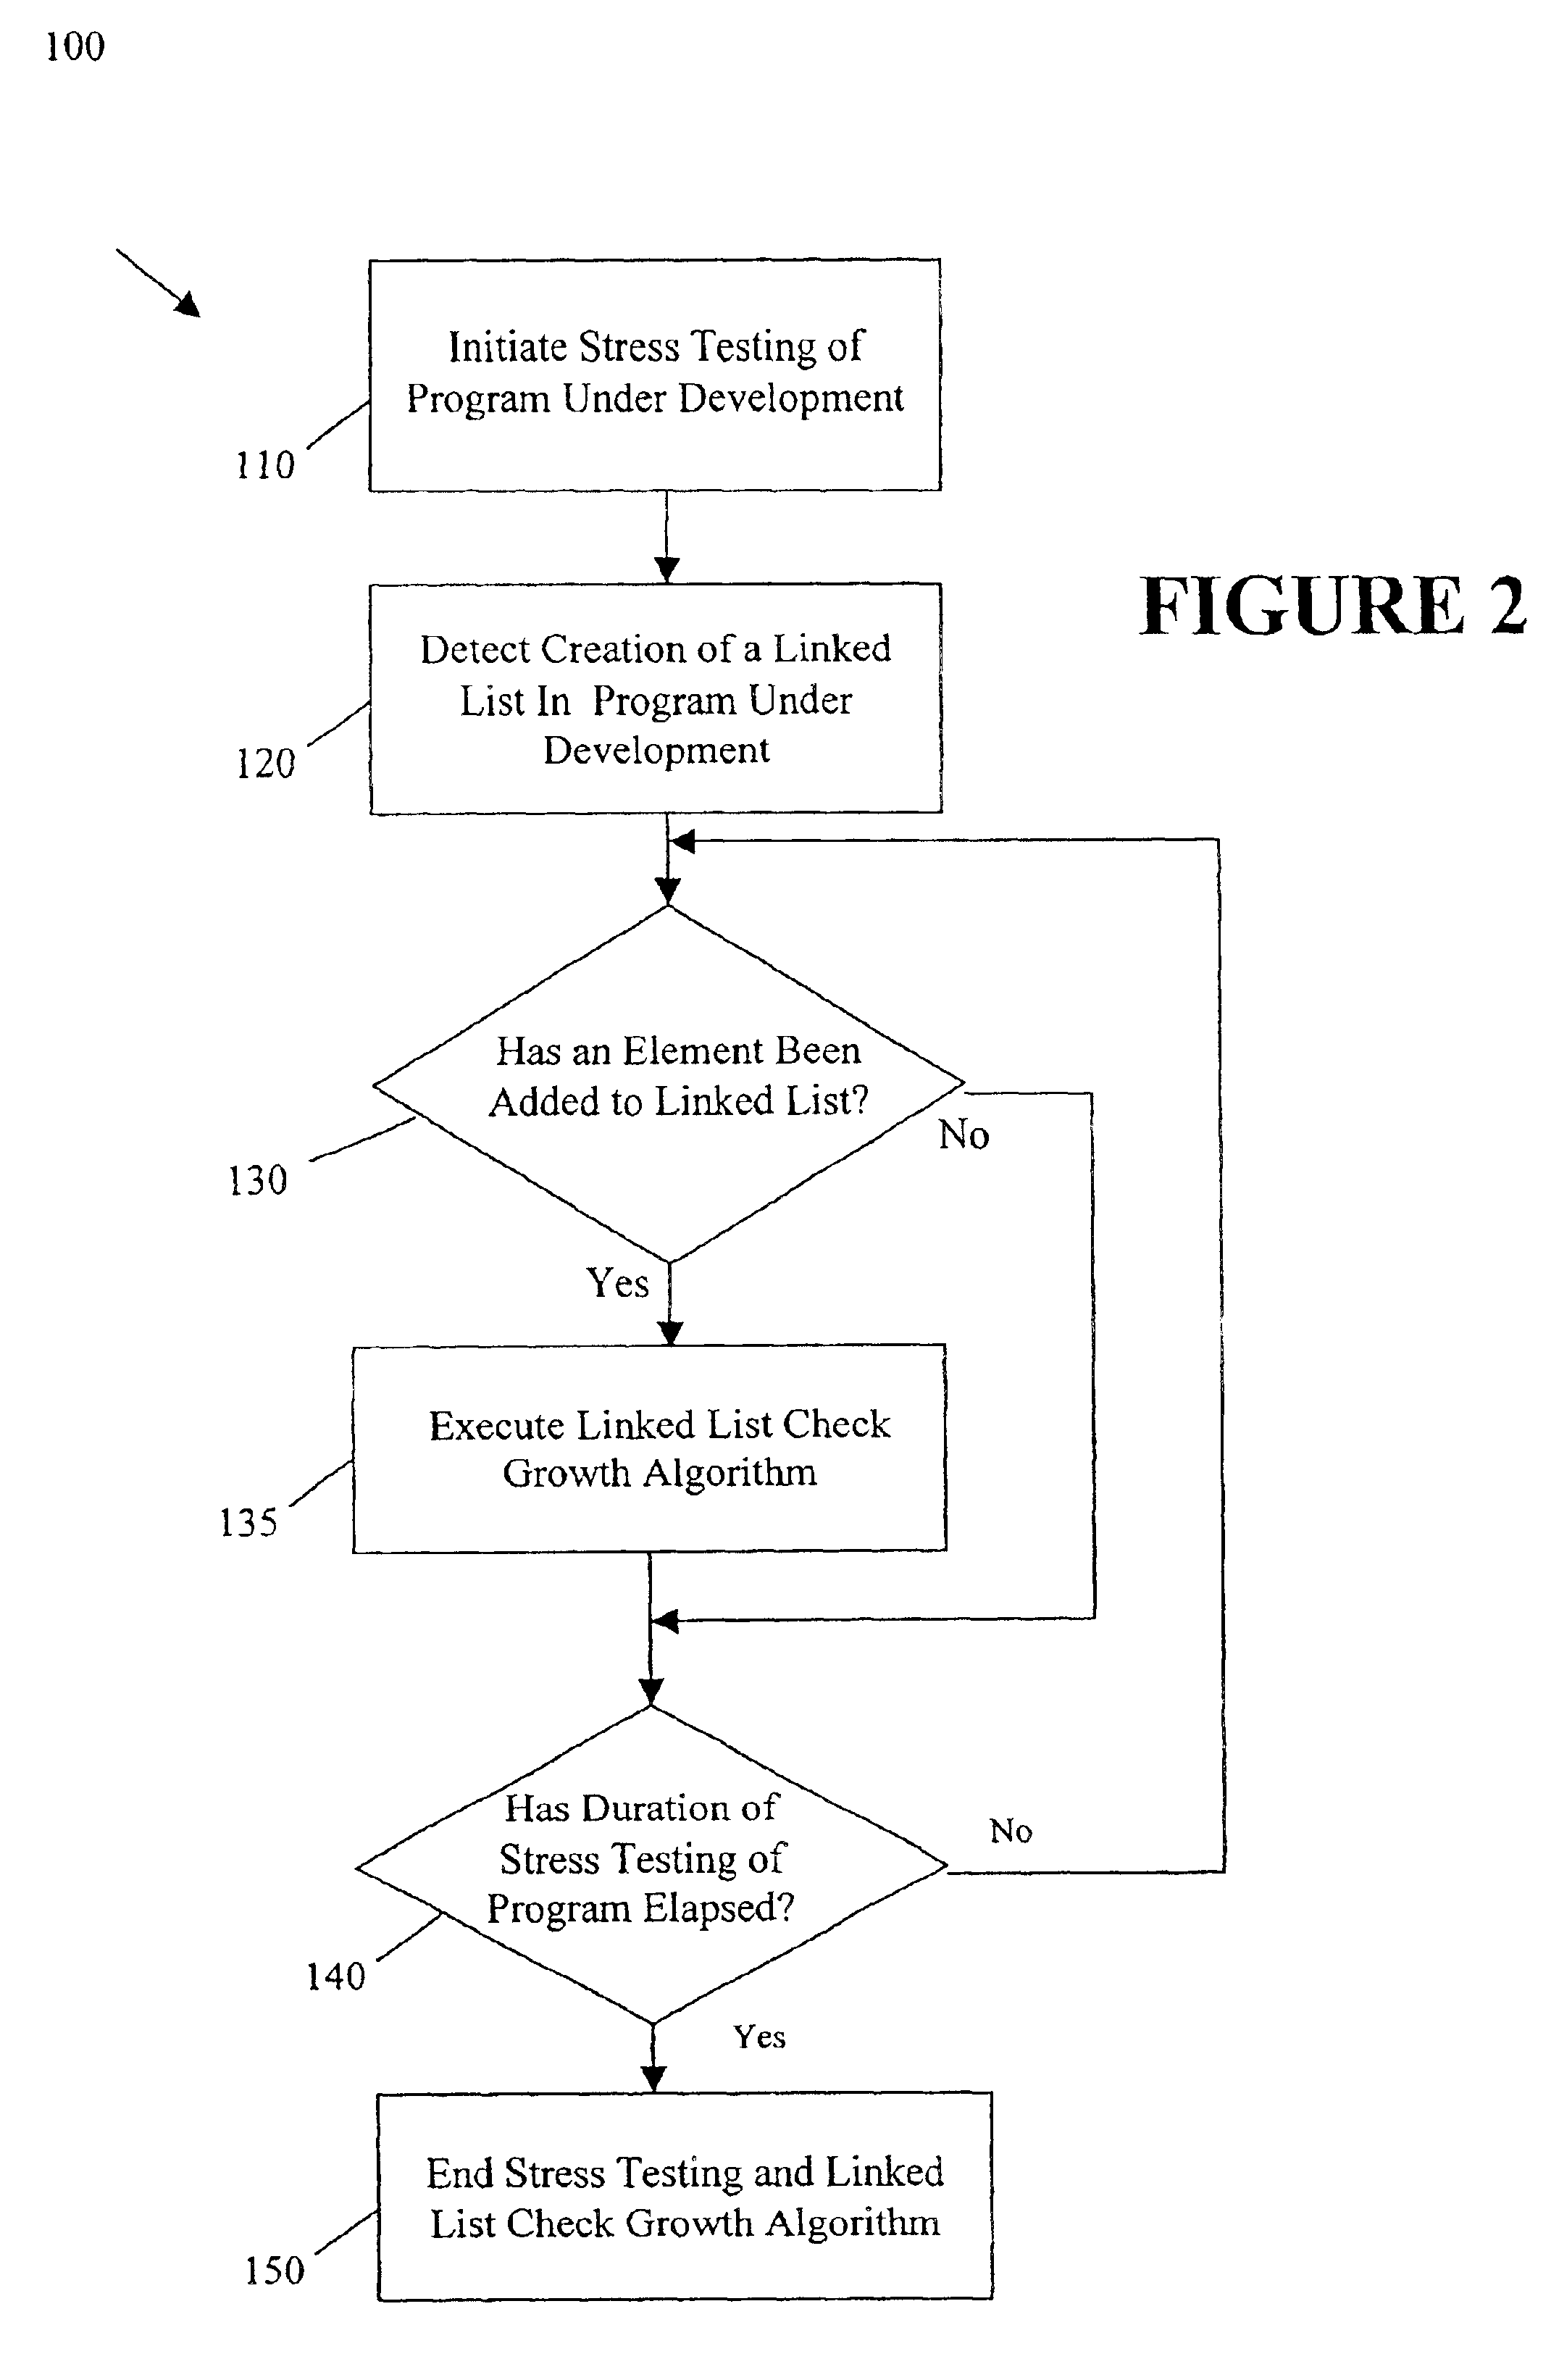 Method to detect unbounded growth of linked lists in a running application